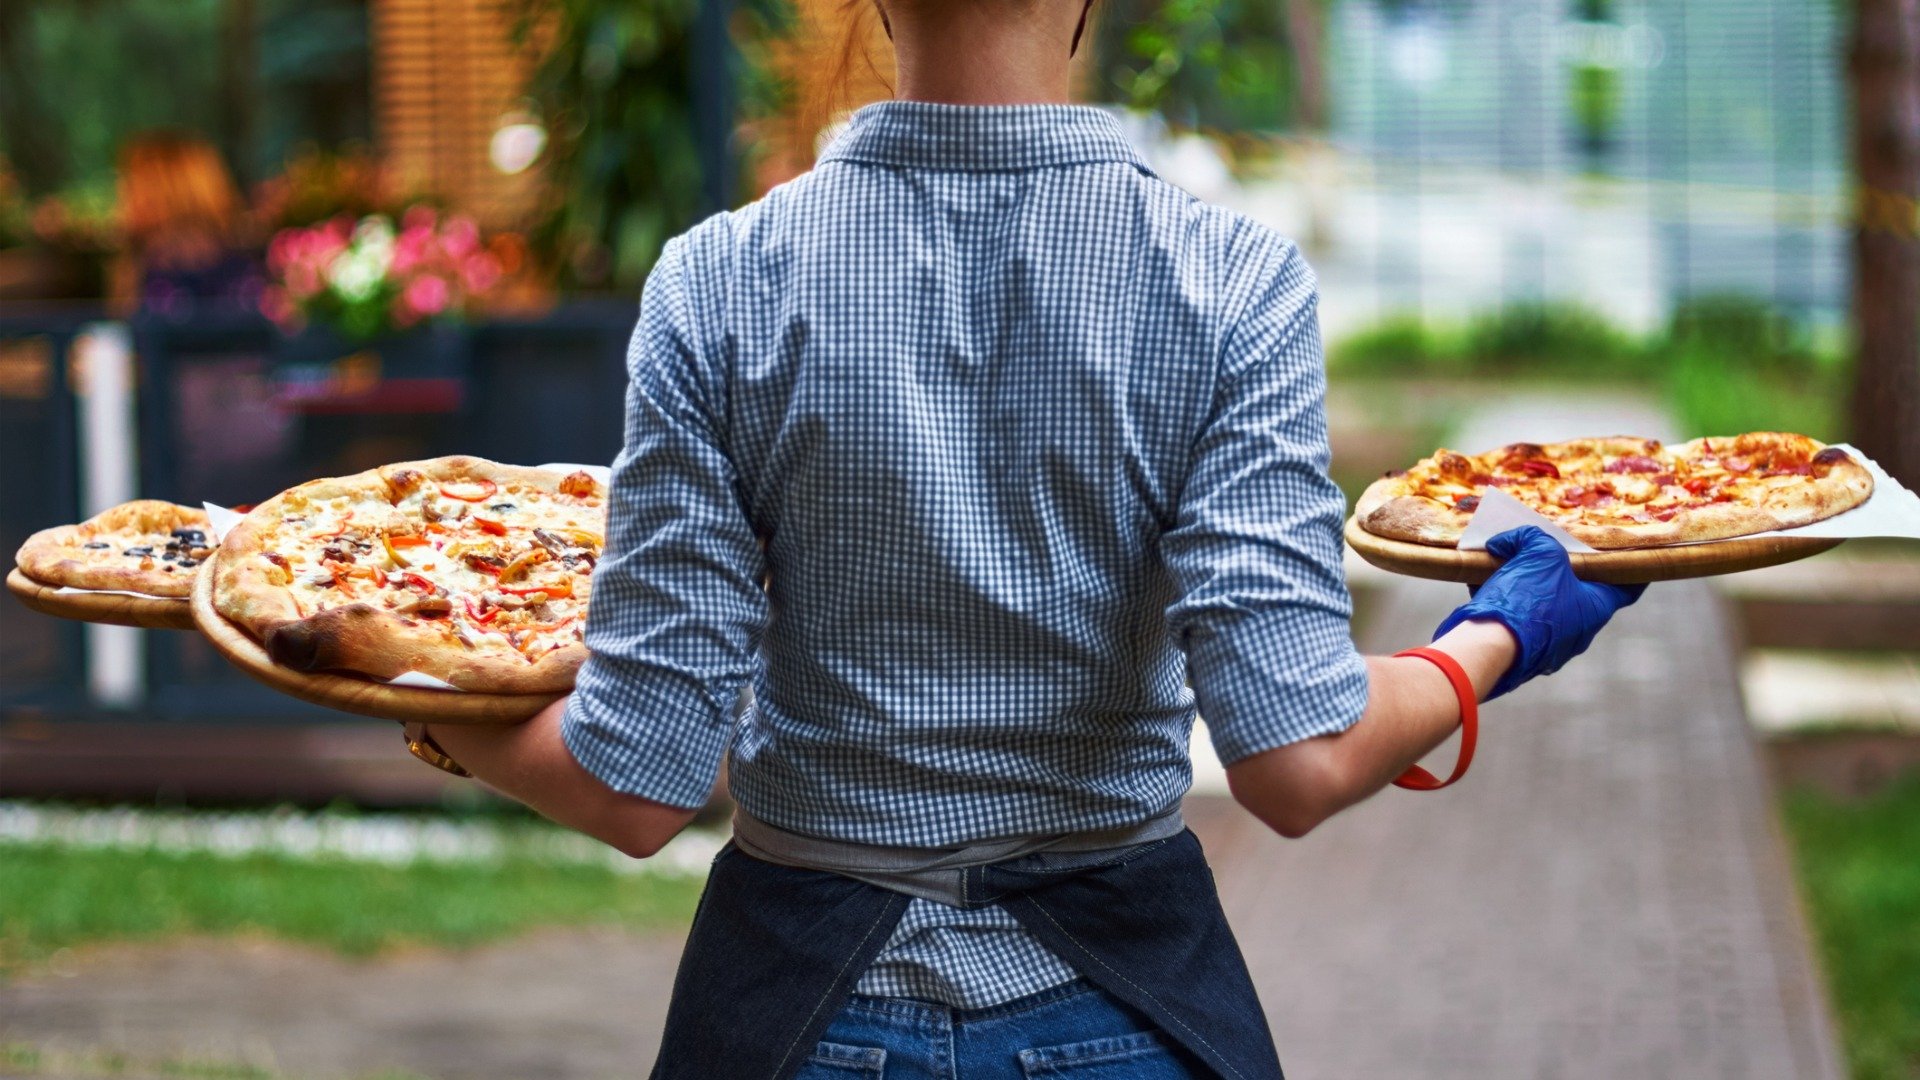 This image shows a female server with her back turned to the camera, holding three large pizzas. The tipping culture in Europe dictates that good servers should be rewarded for their skills. 